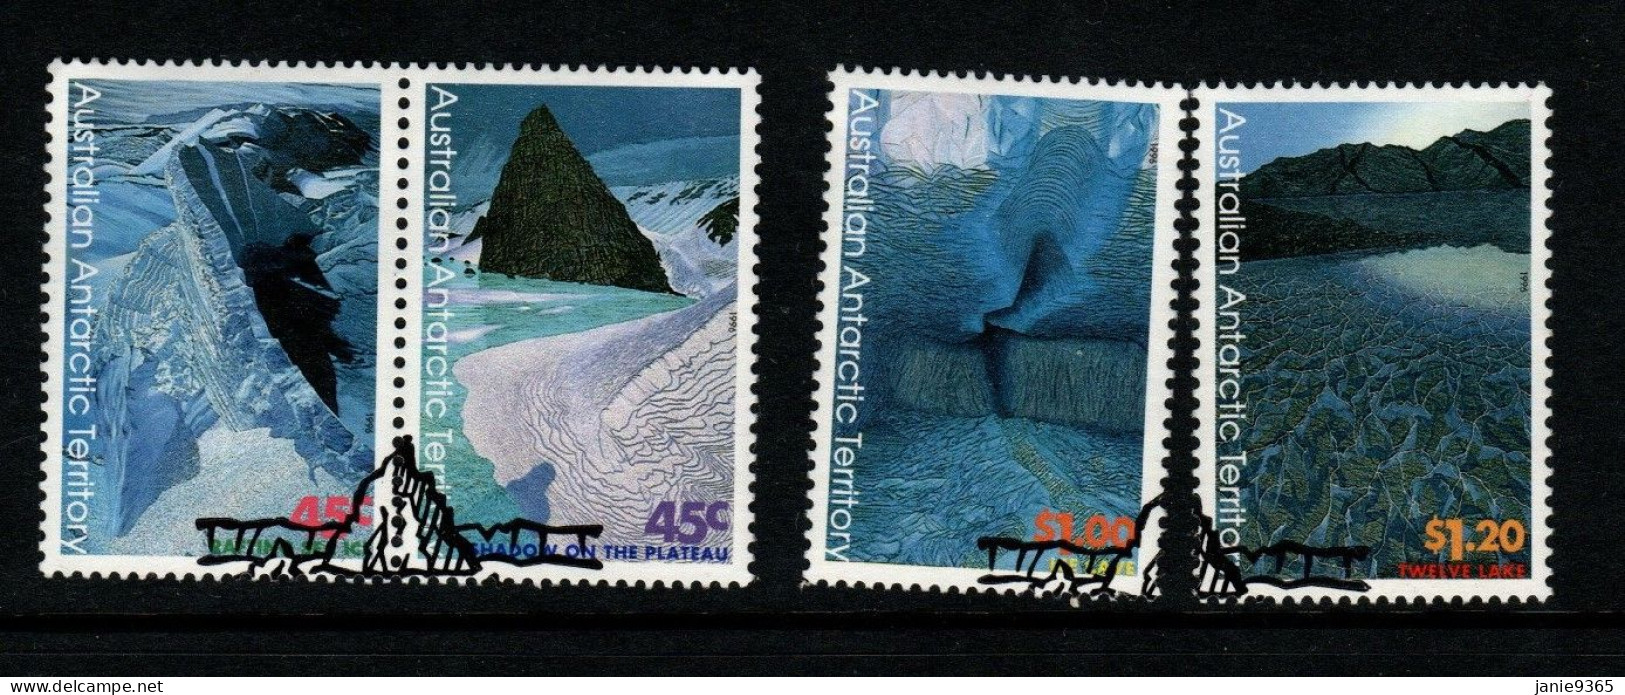 Australian Antarctic Territory ASC 105-08 1996 Landscapes ,used - Used Stamps